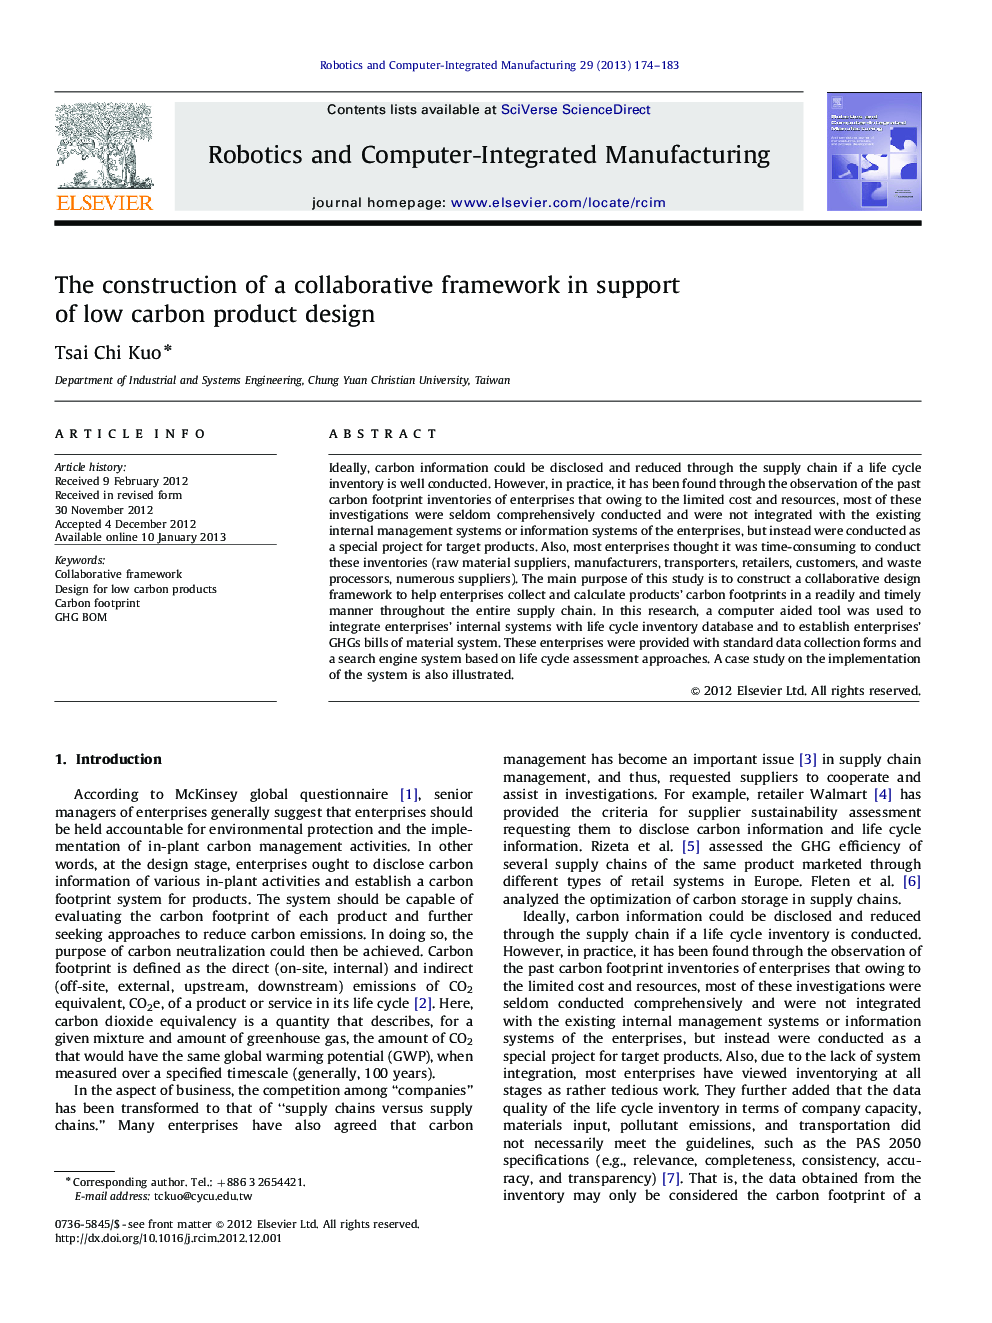 The construction of a collaborative framework in support of low carbon product design